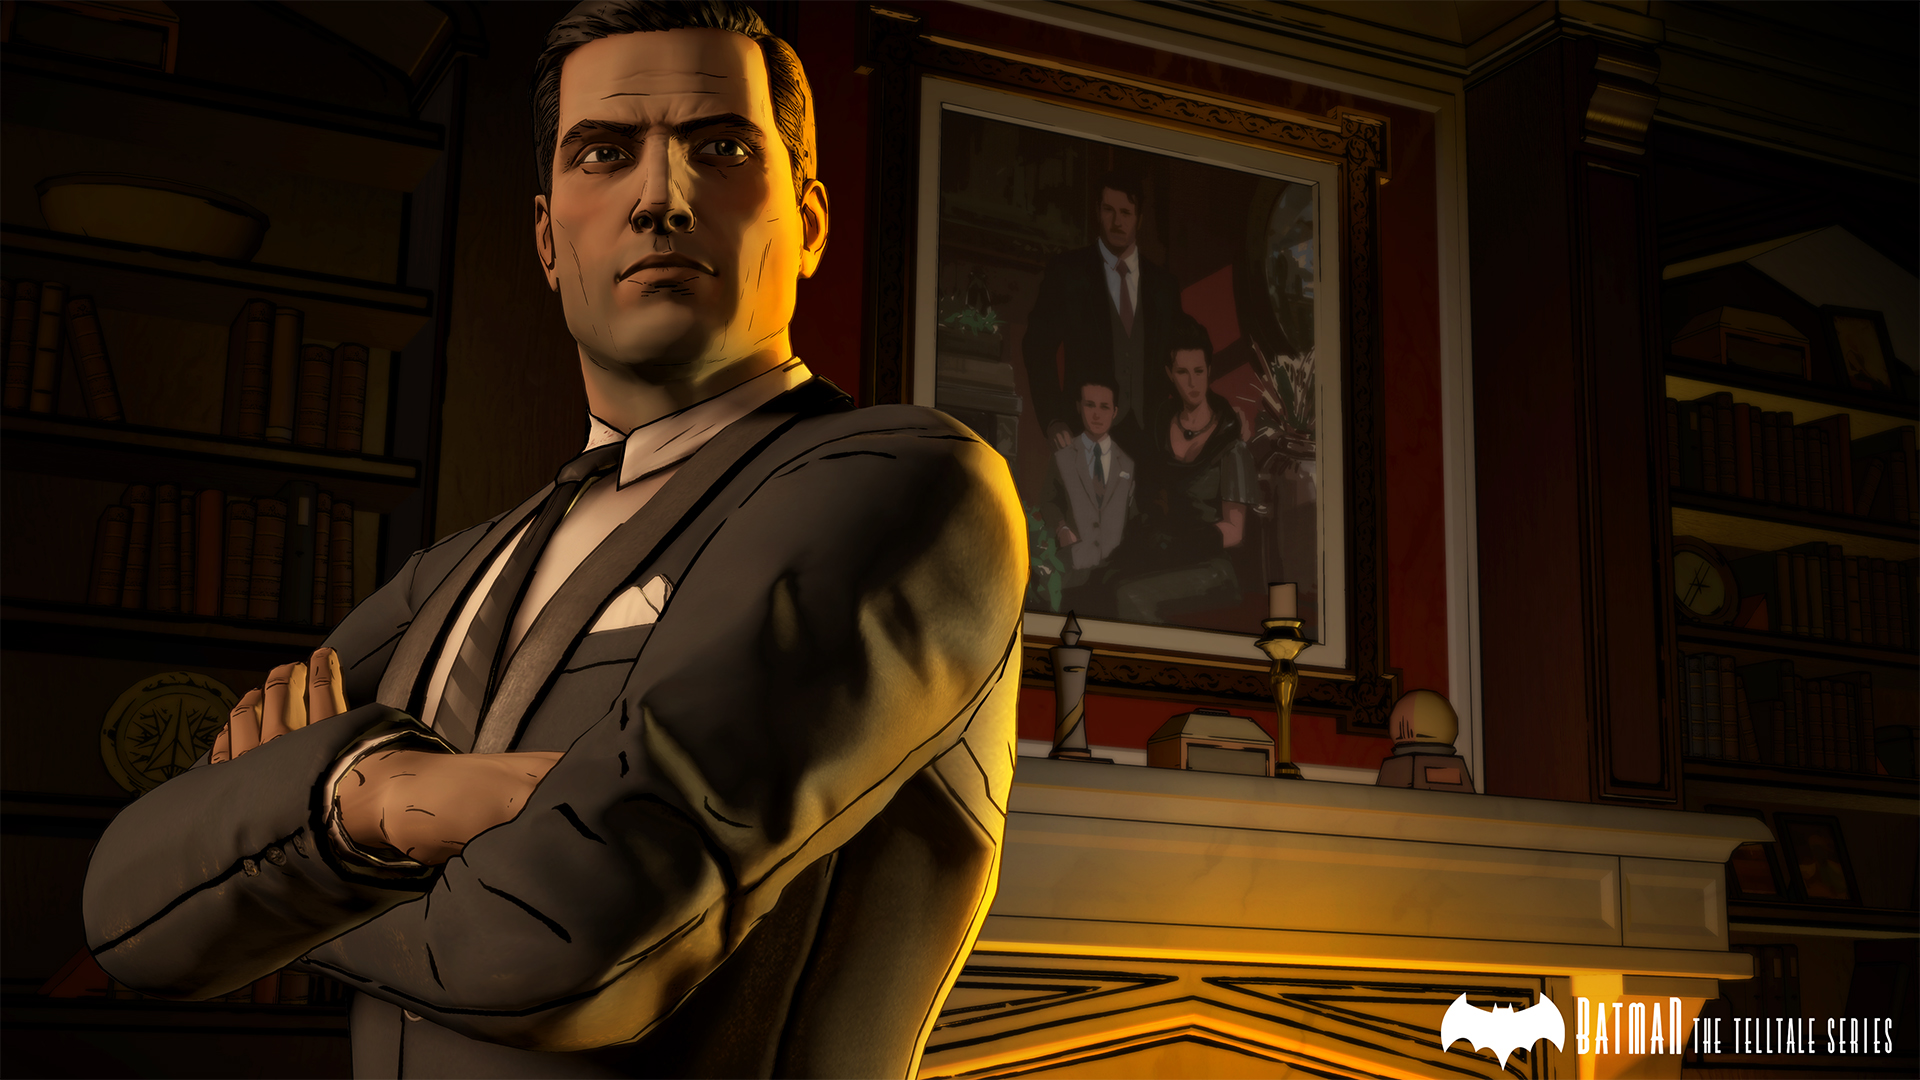 Preview: The Best Thing about Telltale’s Batman is Bruce Wayne